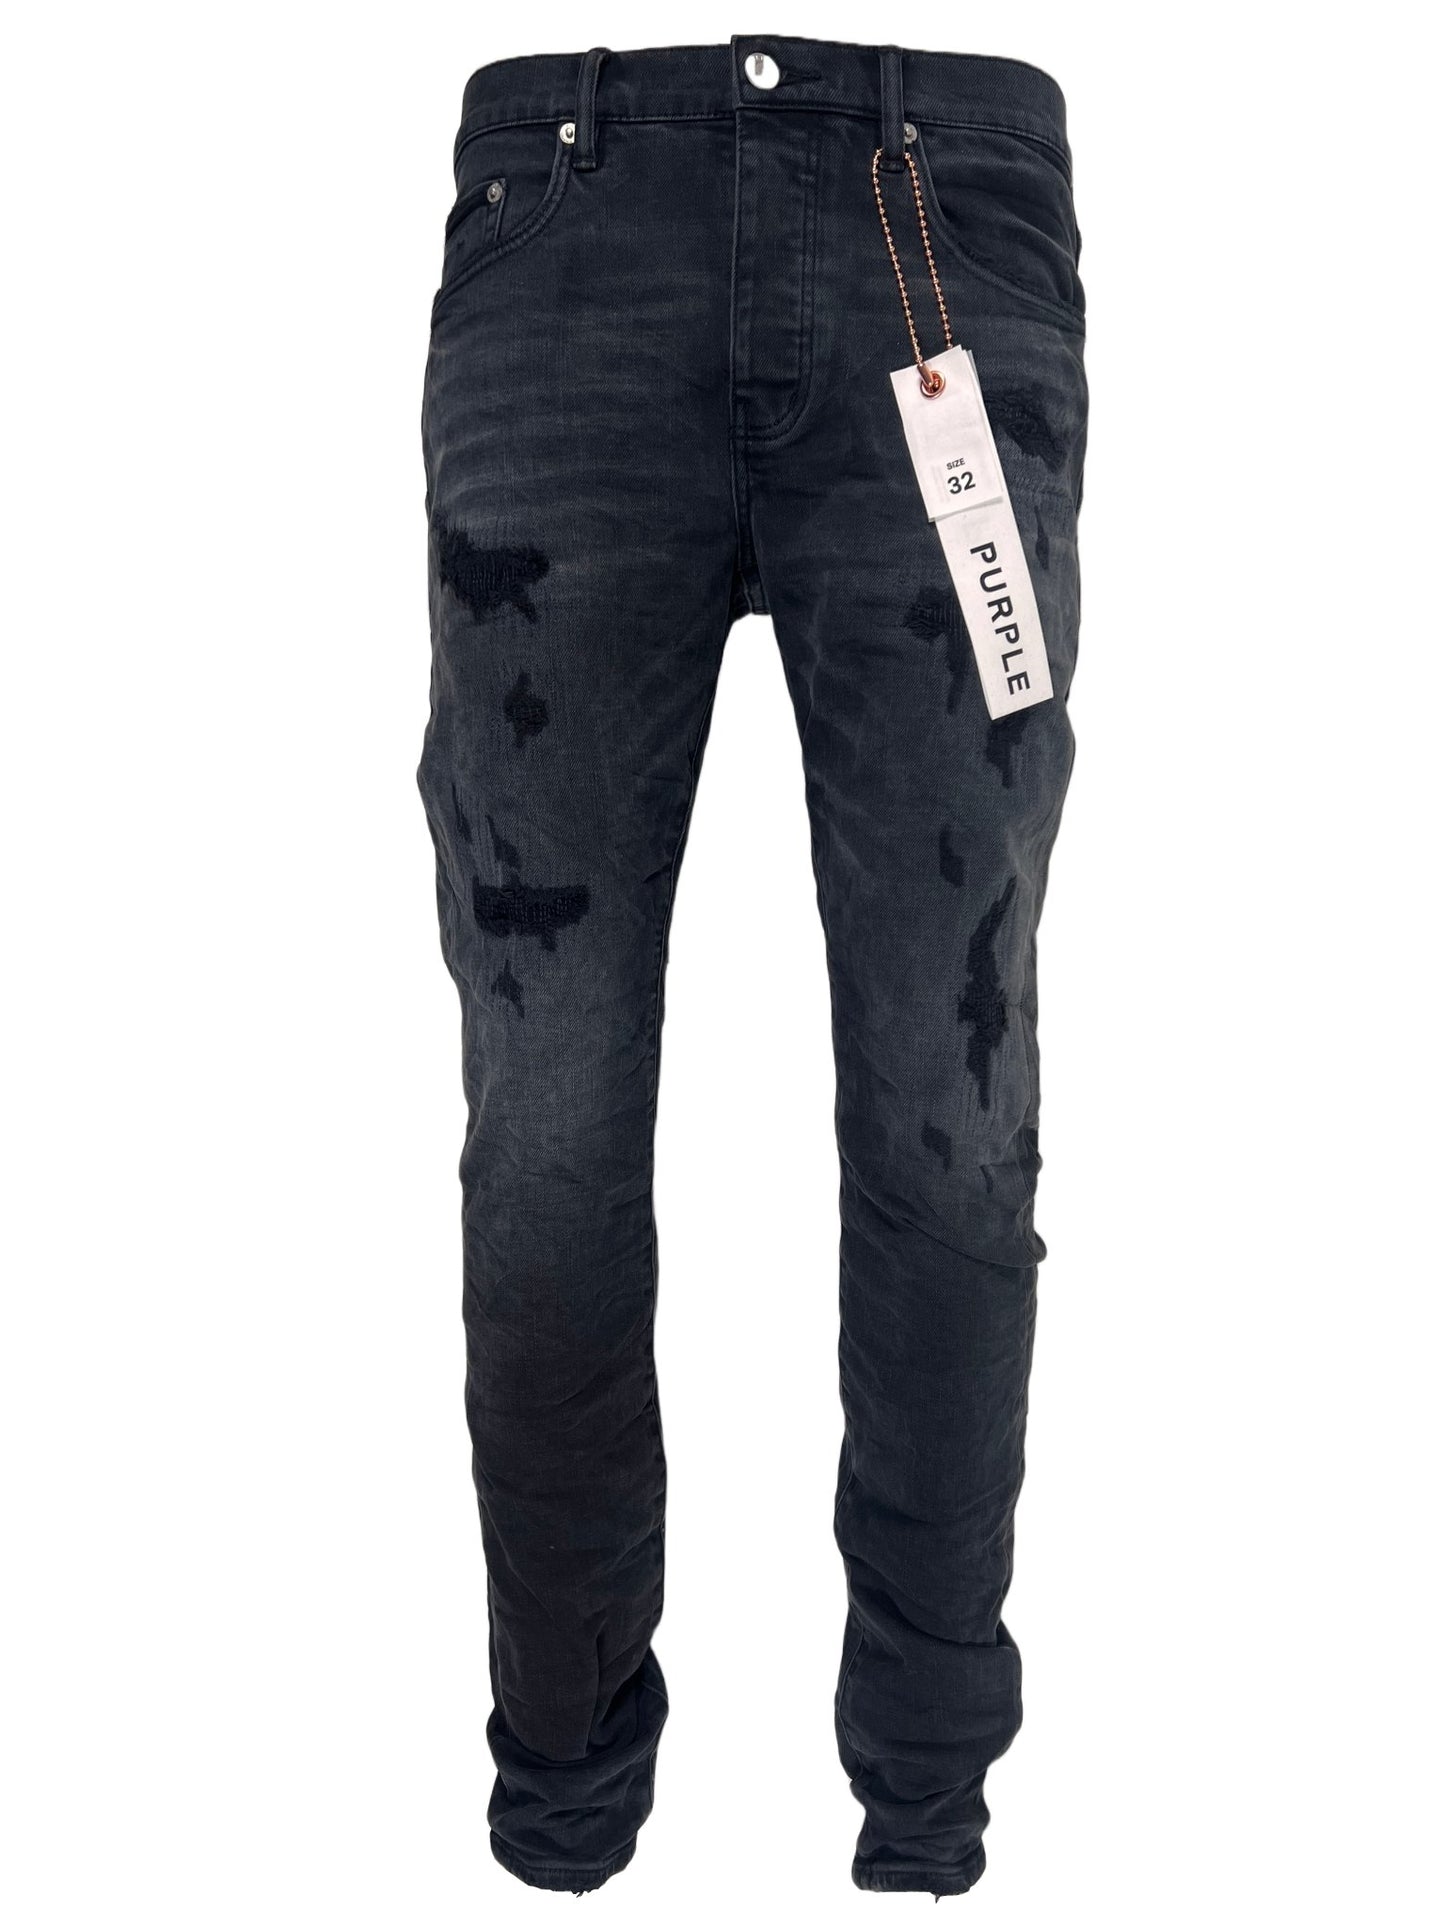 A pair of PURPLE BRAND JEANS P001-BQDP BLACK QUILTED DESTROY PKT with a tag on them.